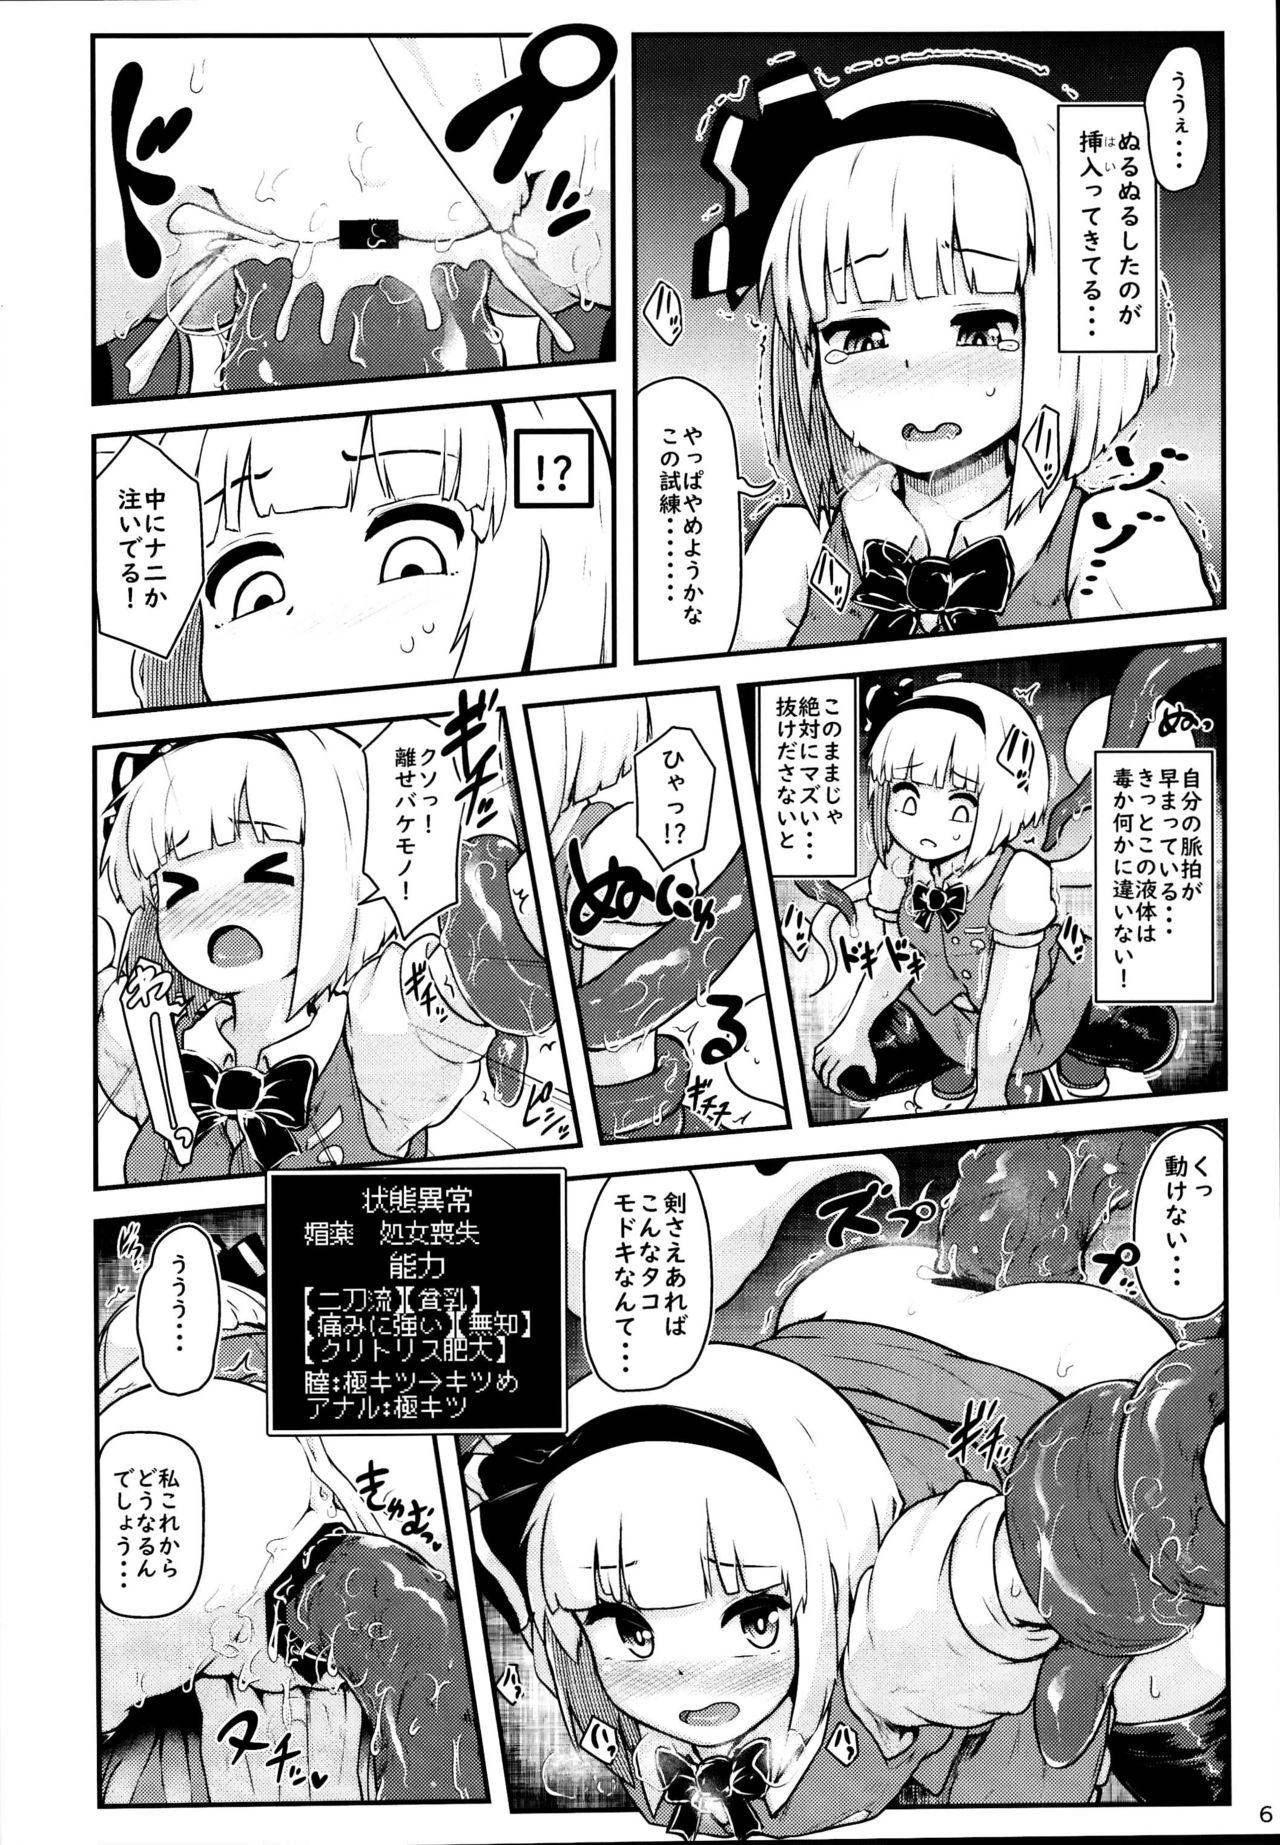 Edging Youmu in Ero Trap Dungeon - Touhou project Big Dick - Page 6